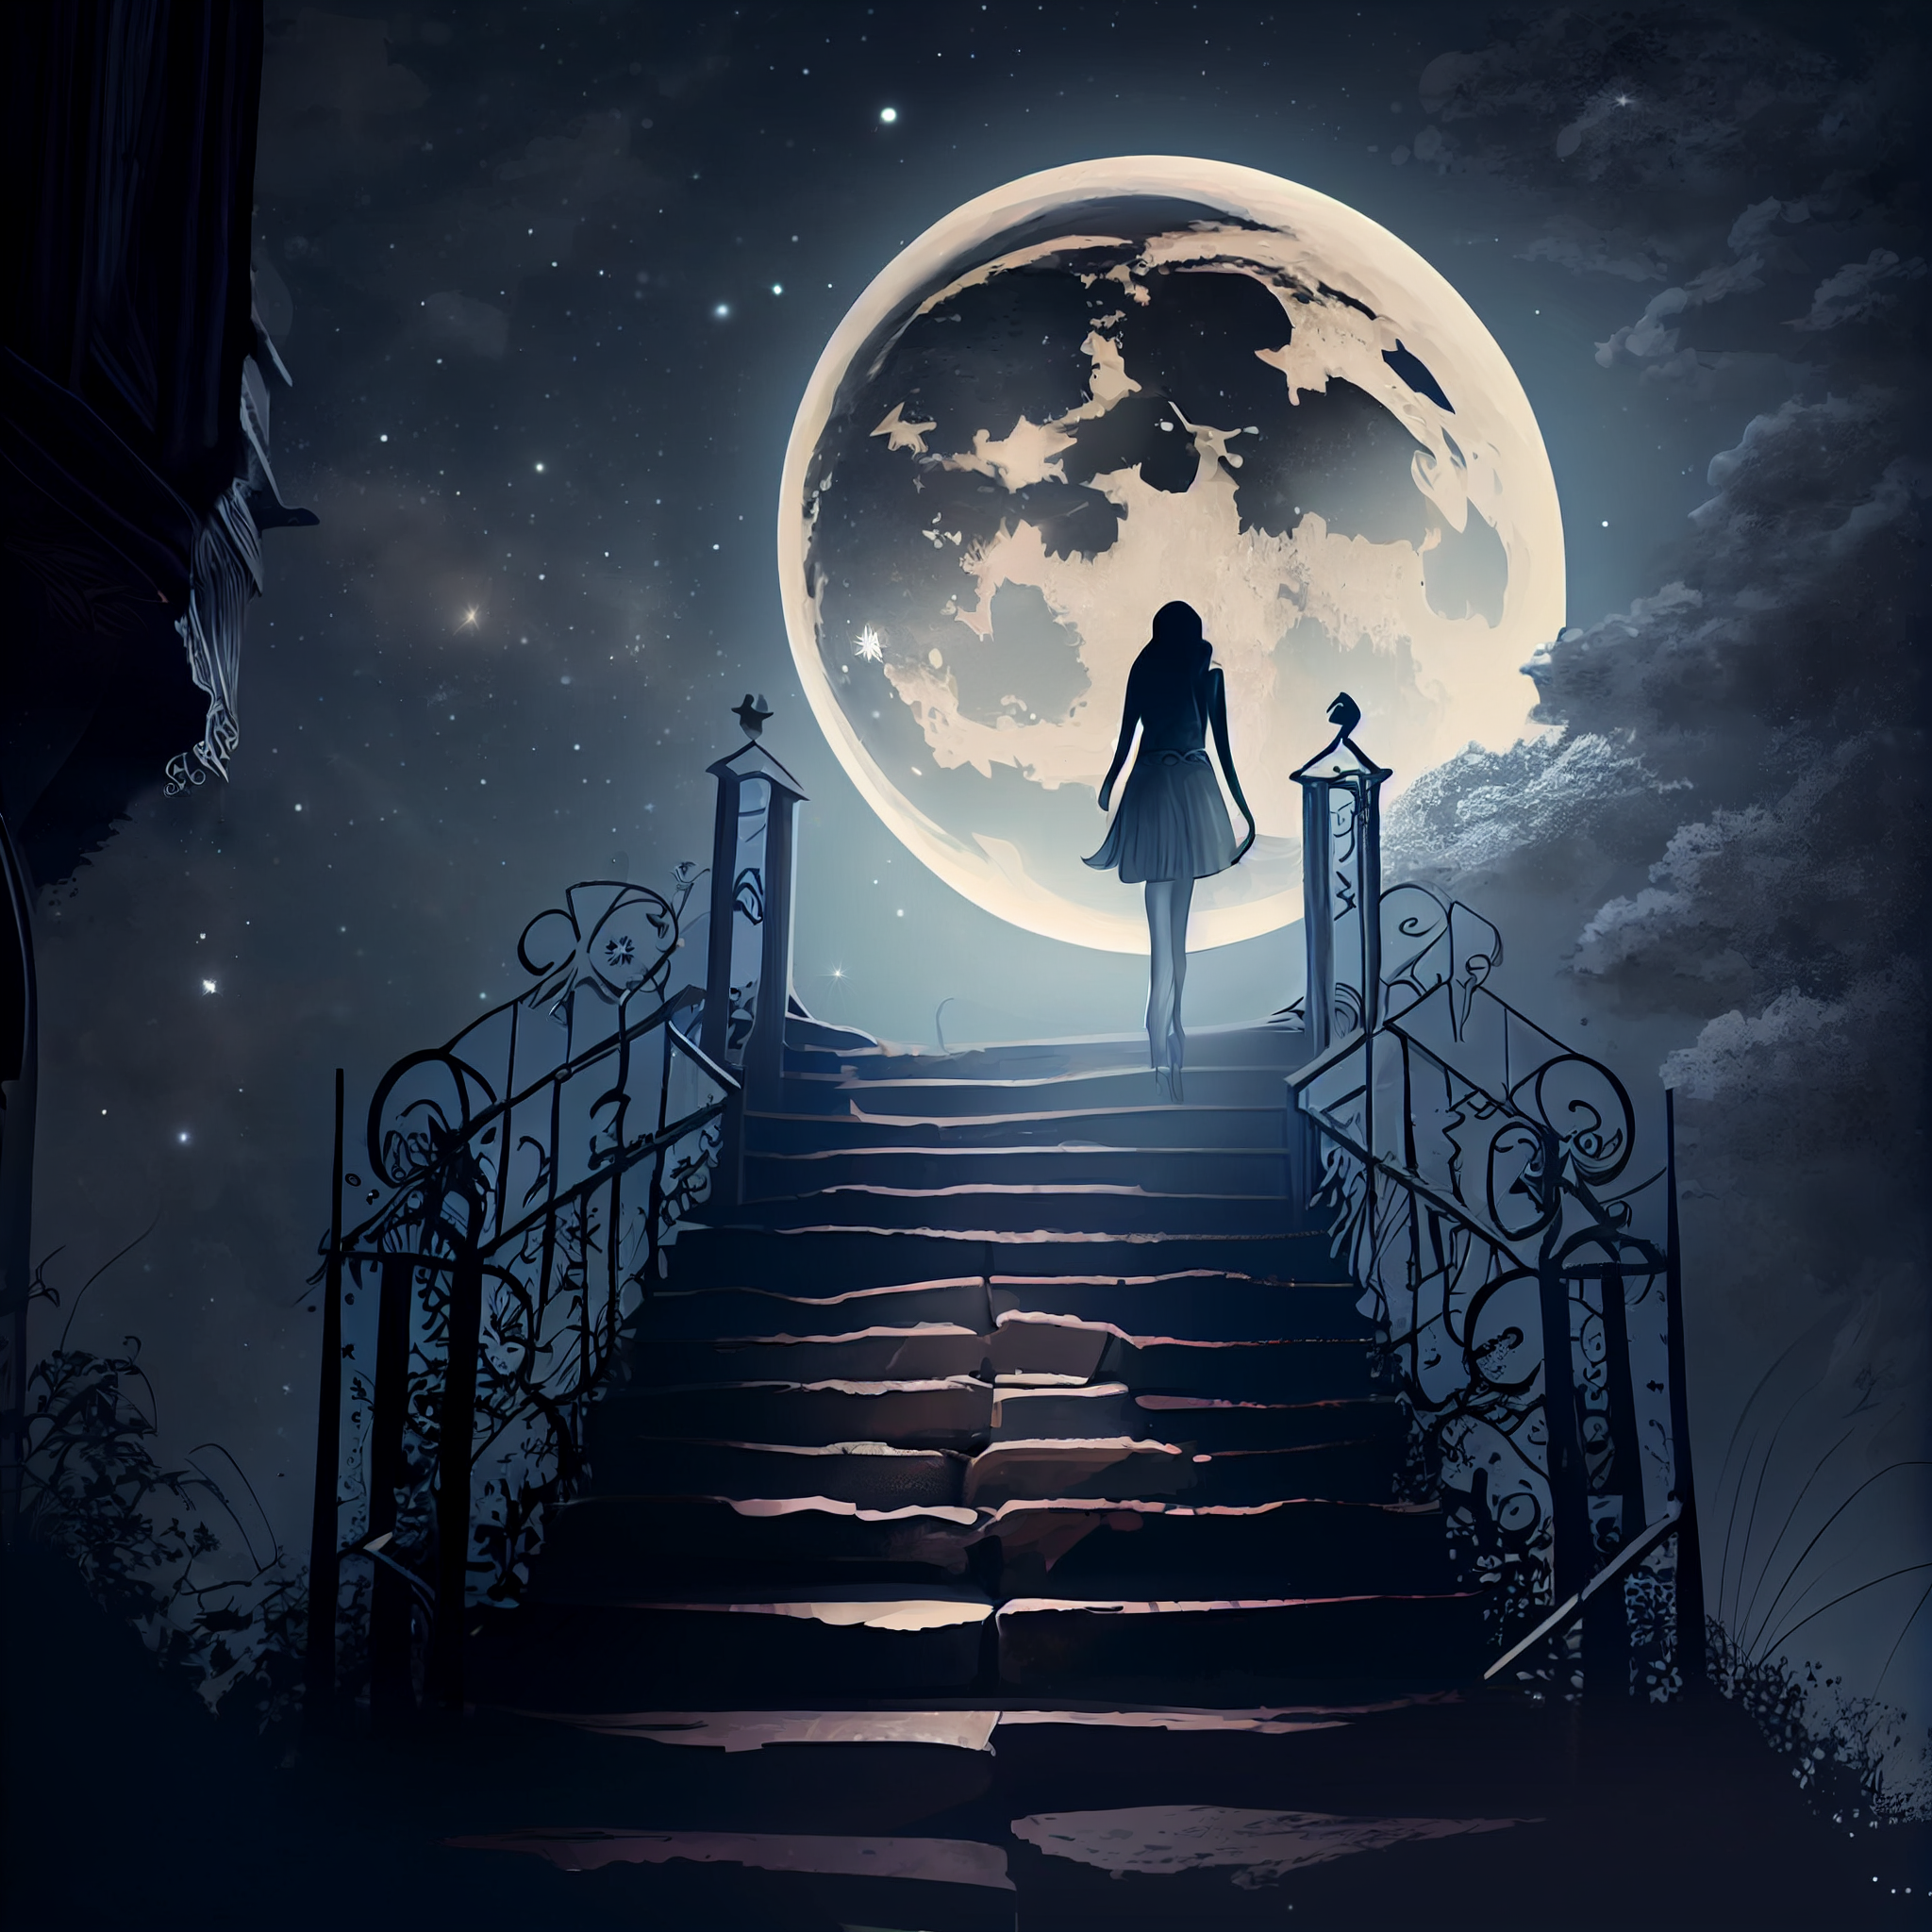 Ascending to the Ethereal: An Print of a Girl on a Staircase Ending in the Moonlight Sky